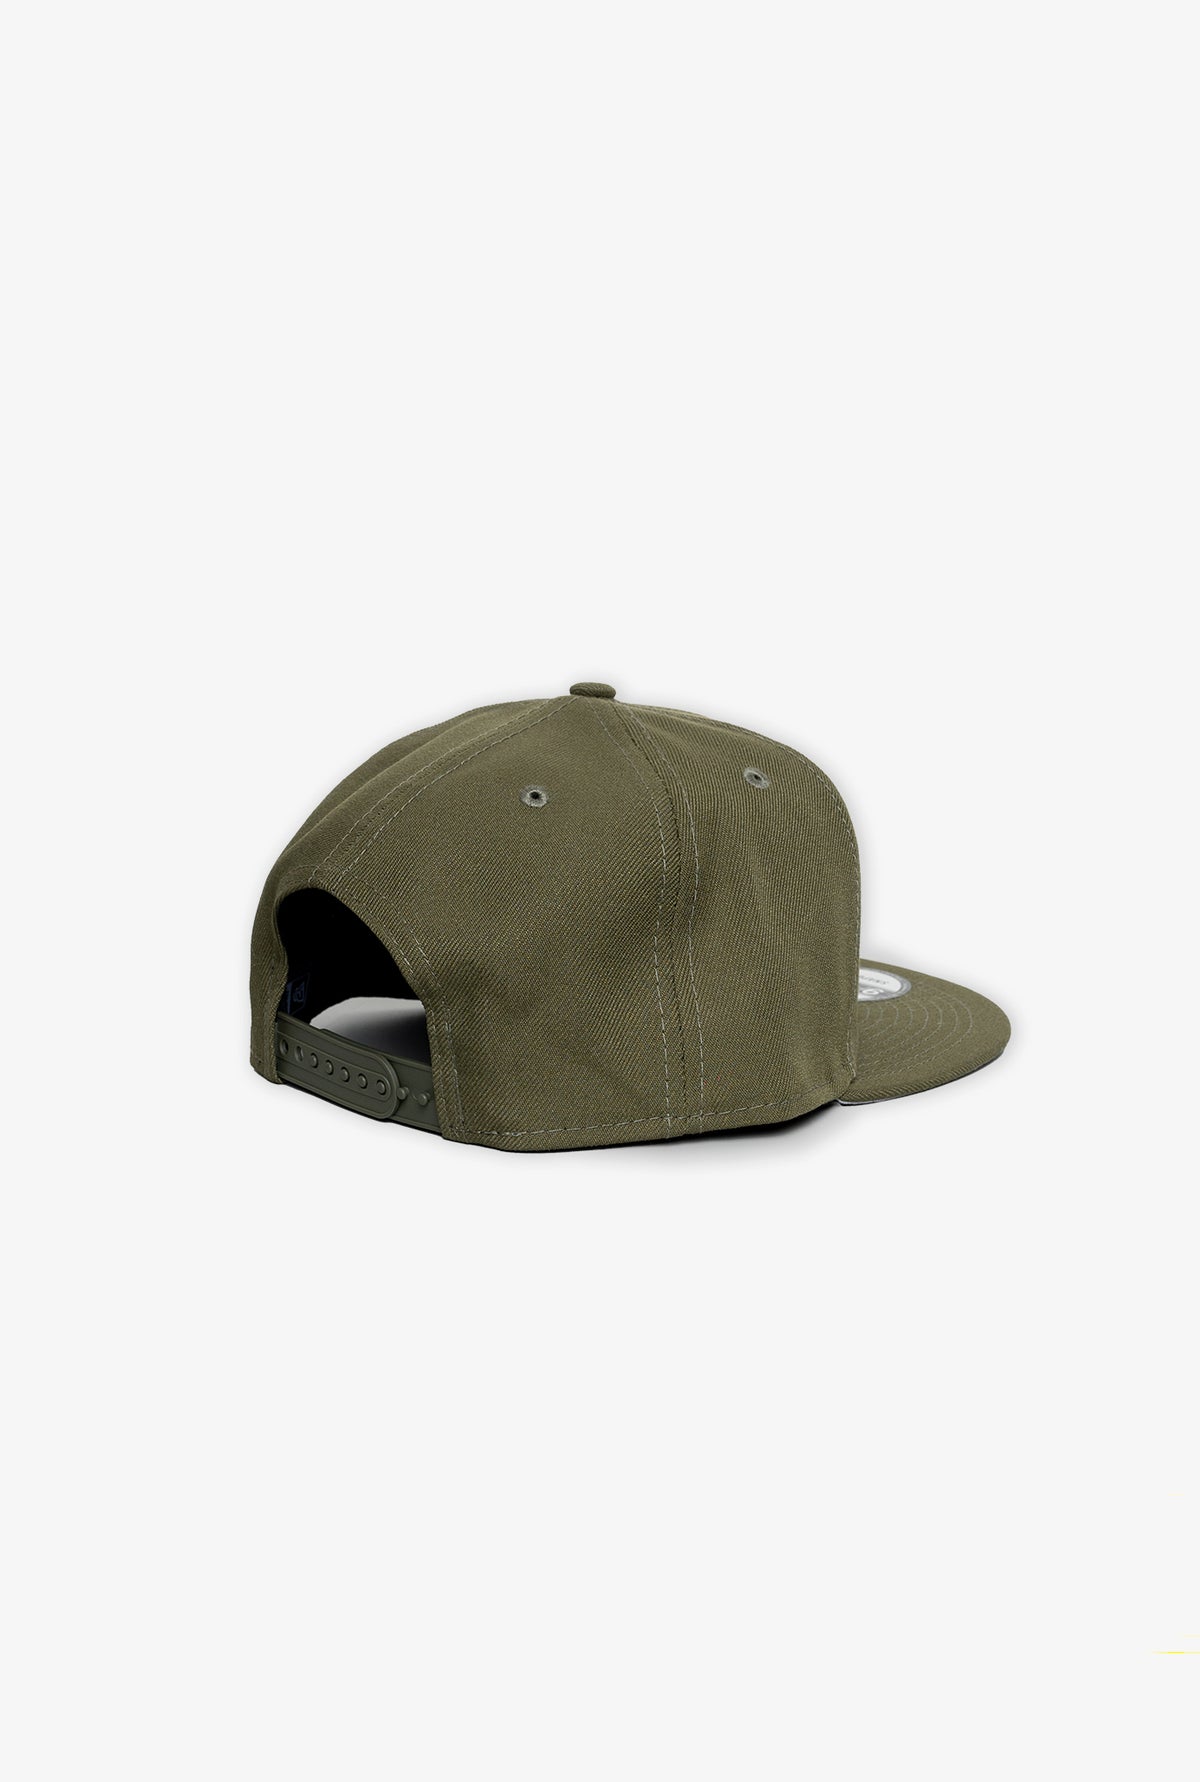 Los Angeles Dodgers 9FIFTY Color Pack Snapback - Olive Green